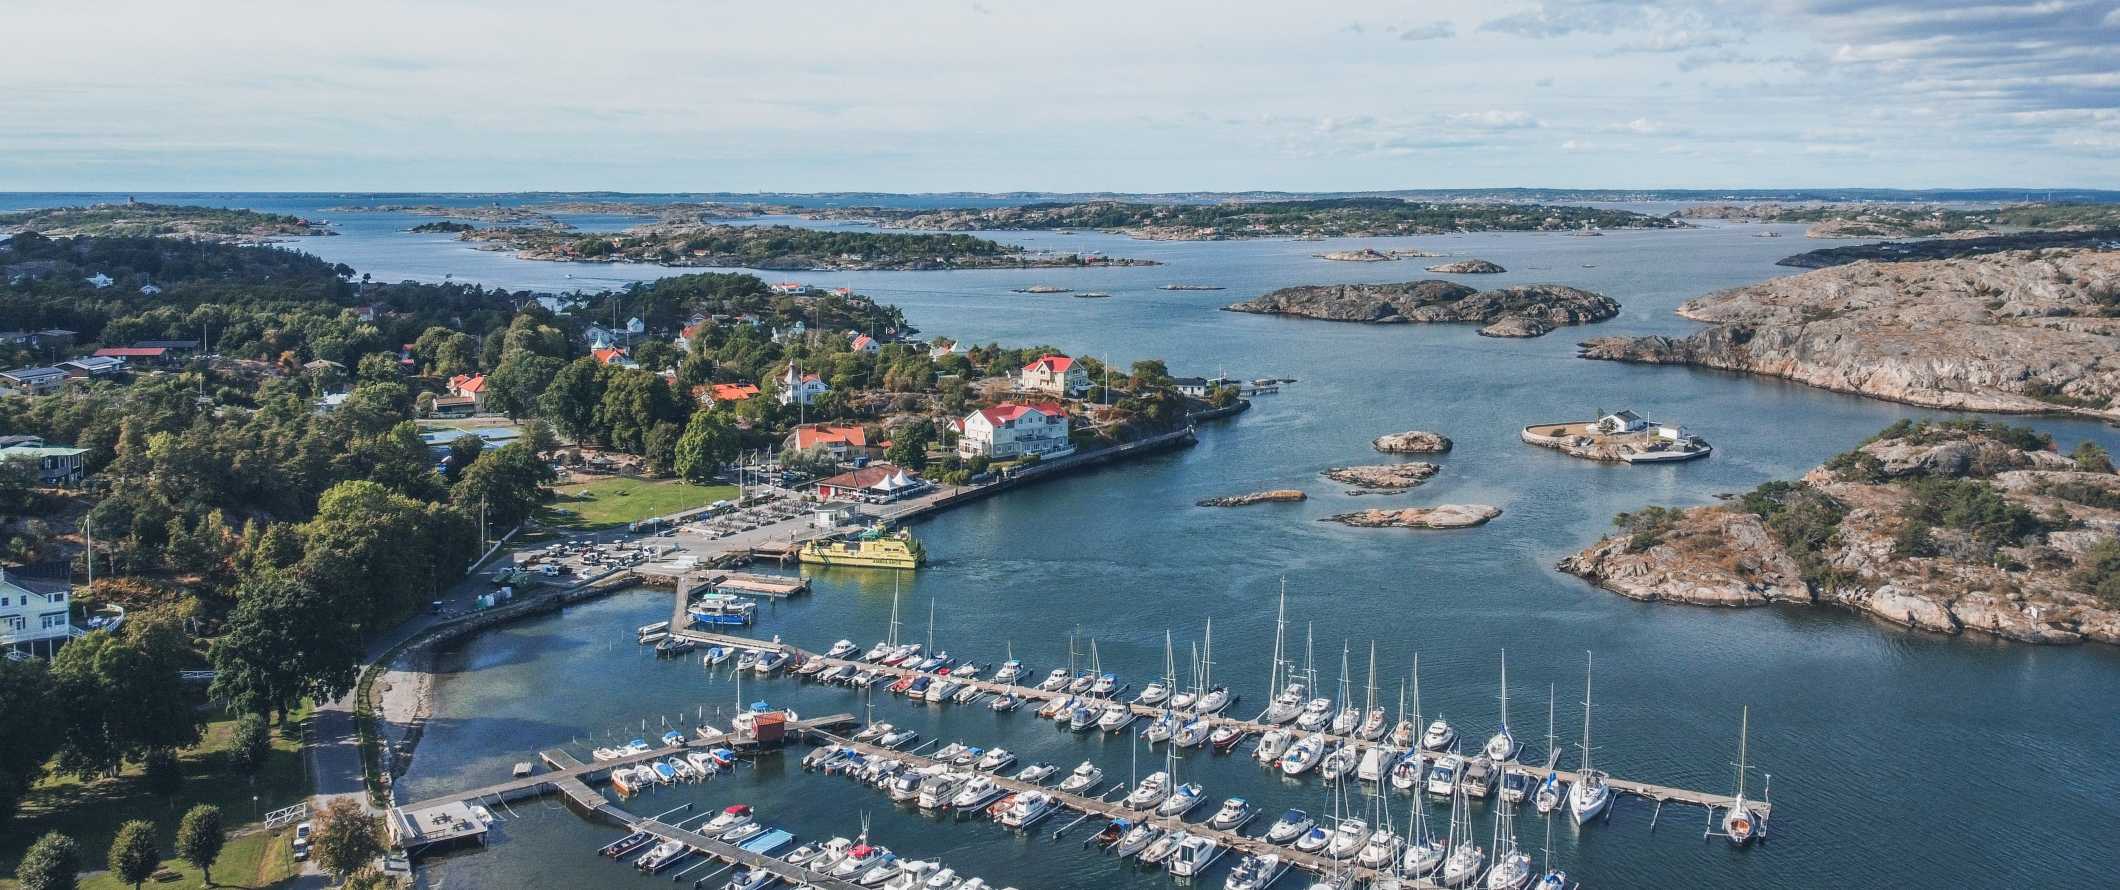 Aerial view of a harbor filled with sailboats and islands in the background in Gothenburg, Sweden